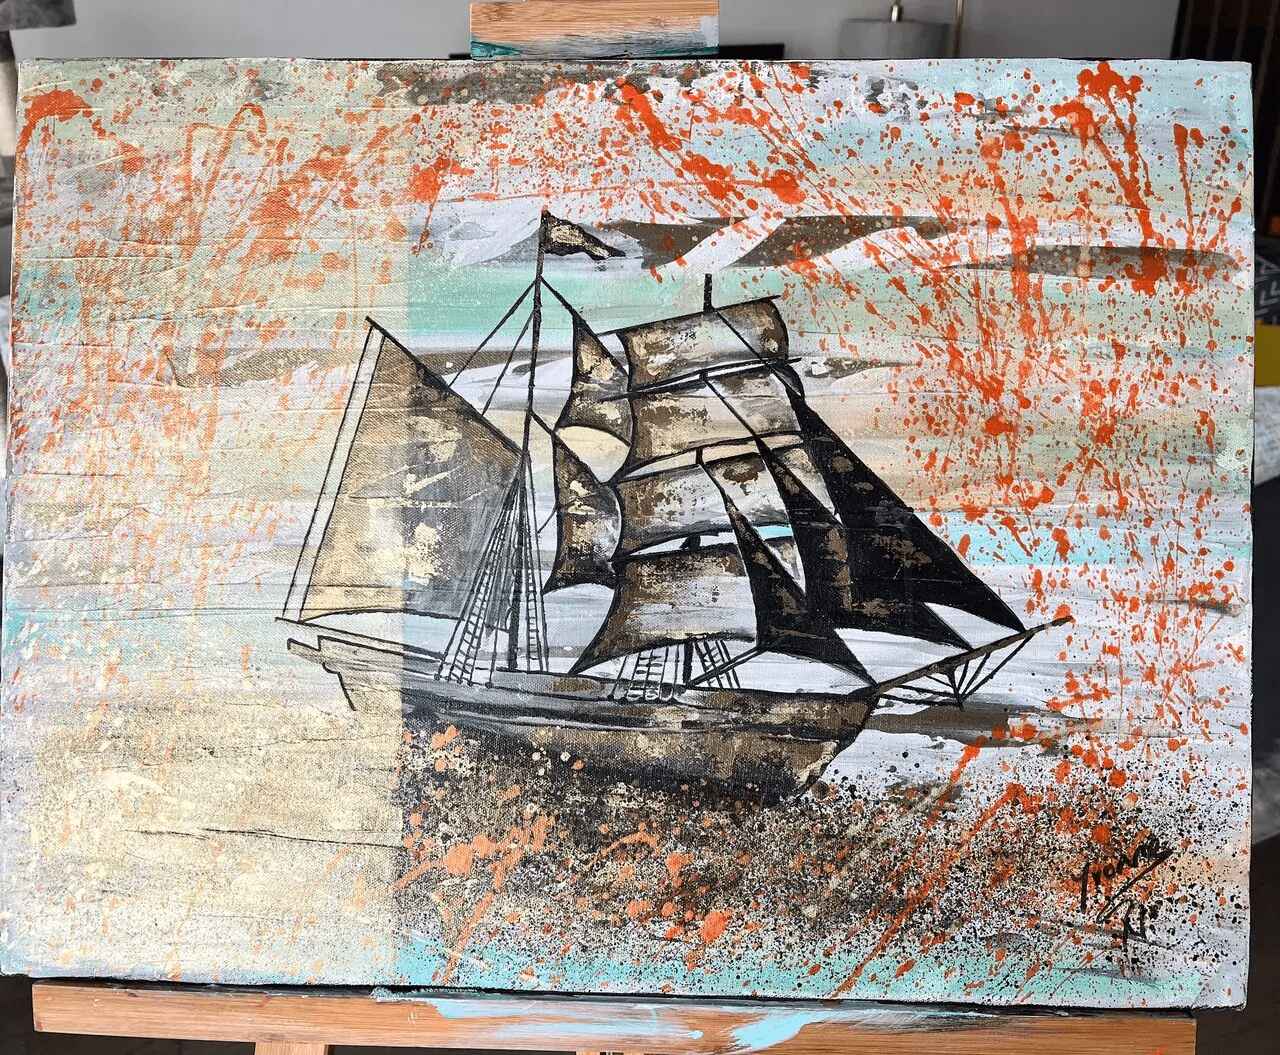 A painting of a ship on the ground.